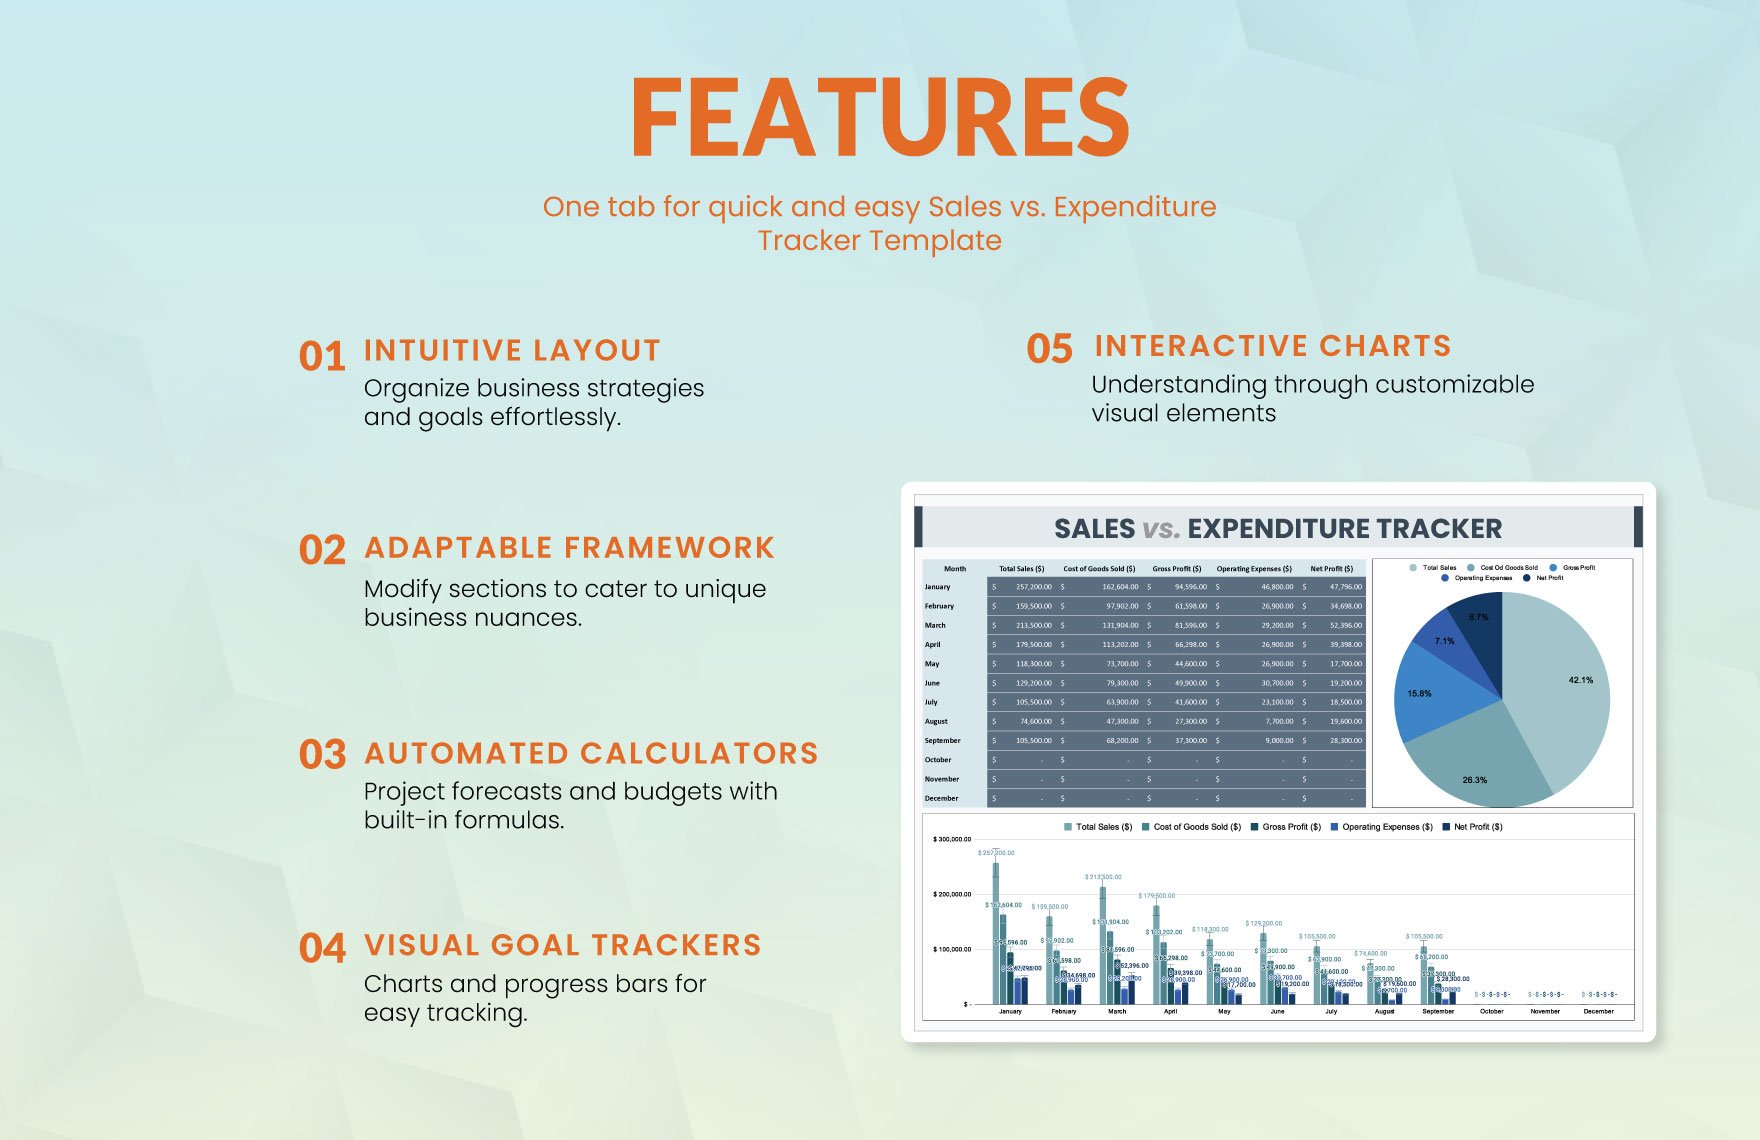 Sales vs. Expenditure Tracker Template